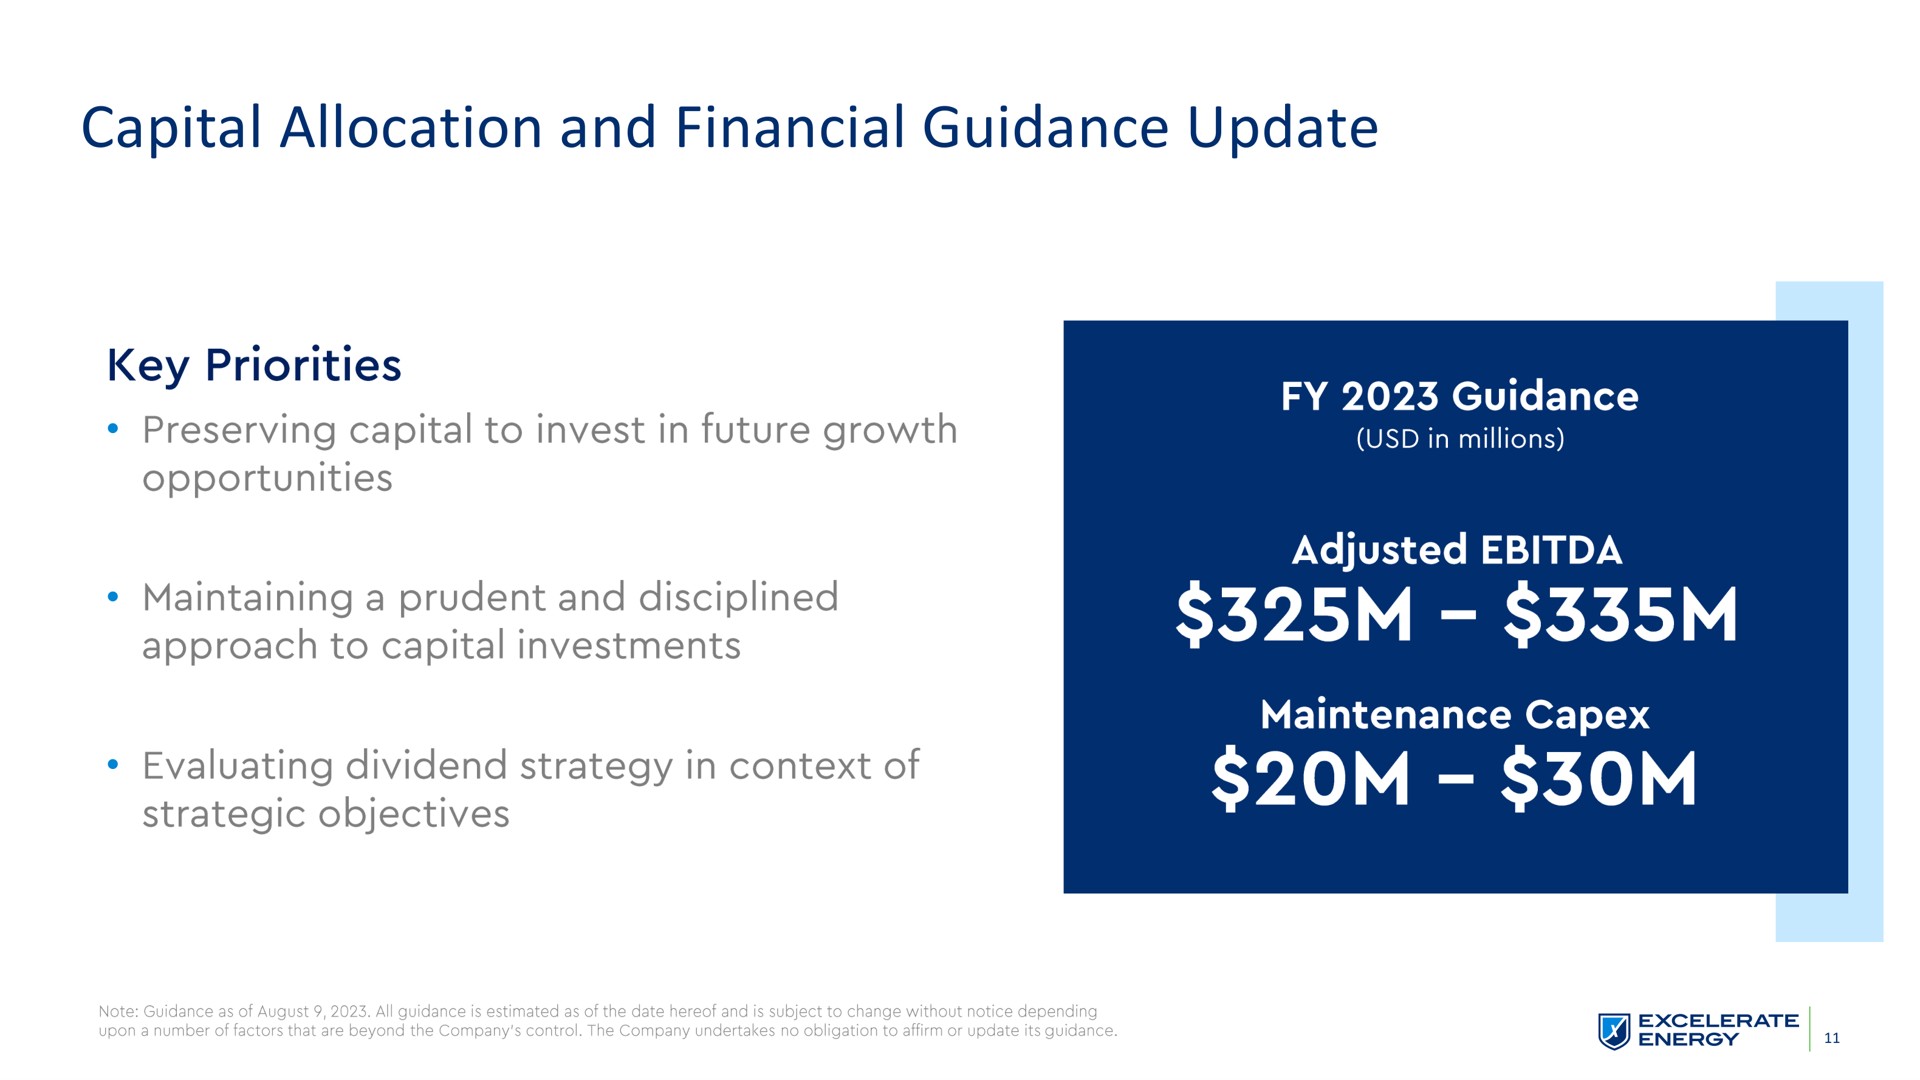 capital allocation and financial guidance update key priorities | Excelerate Energy